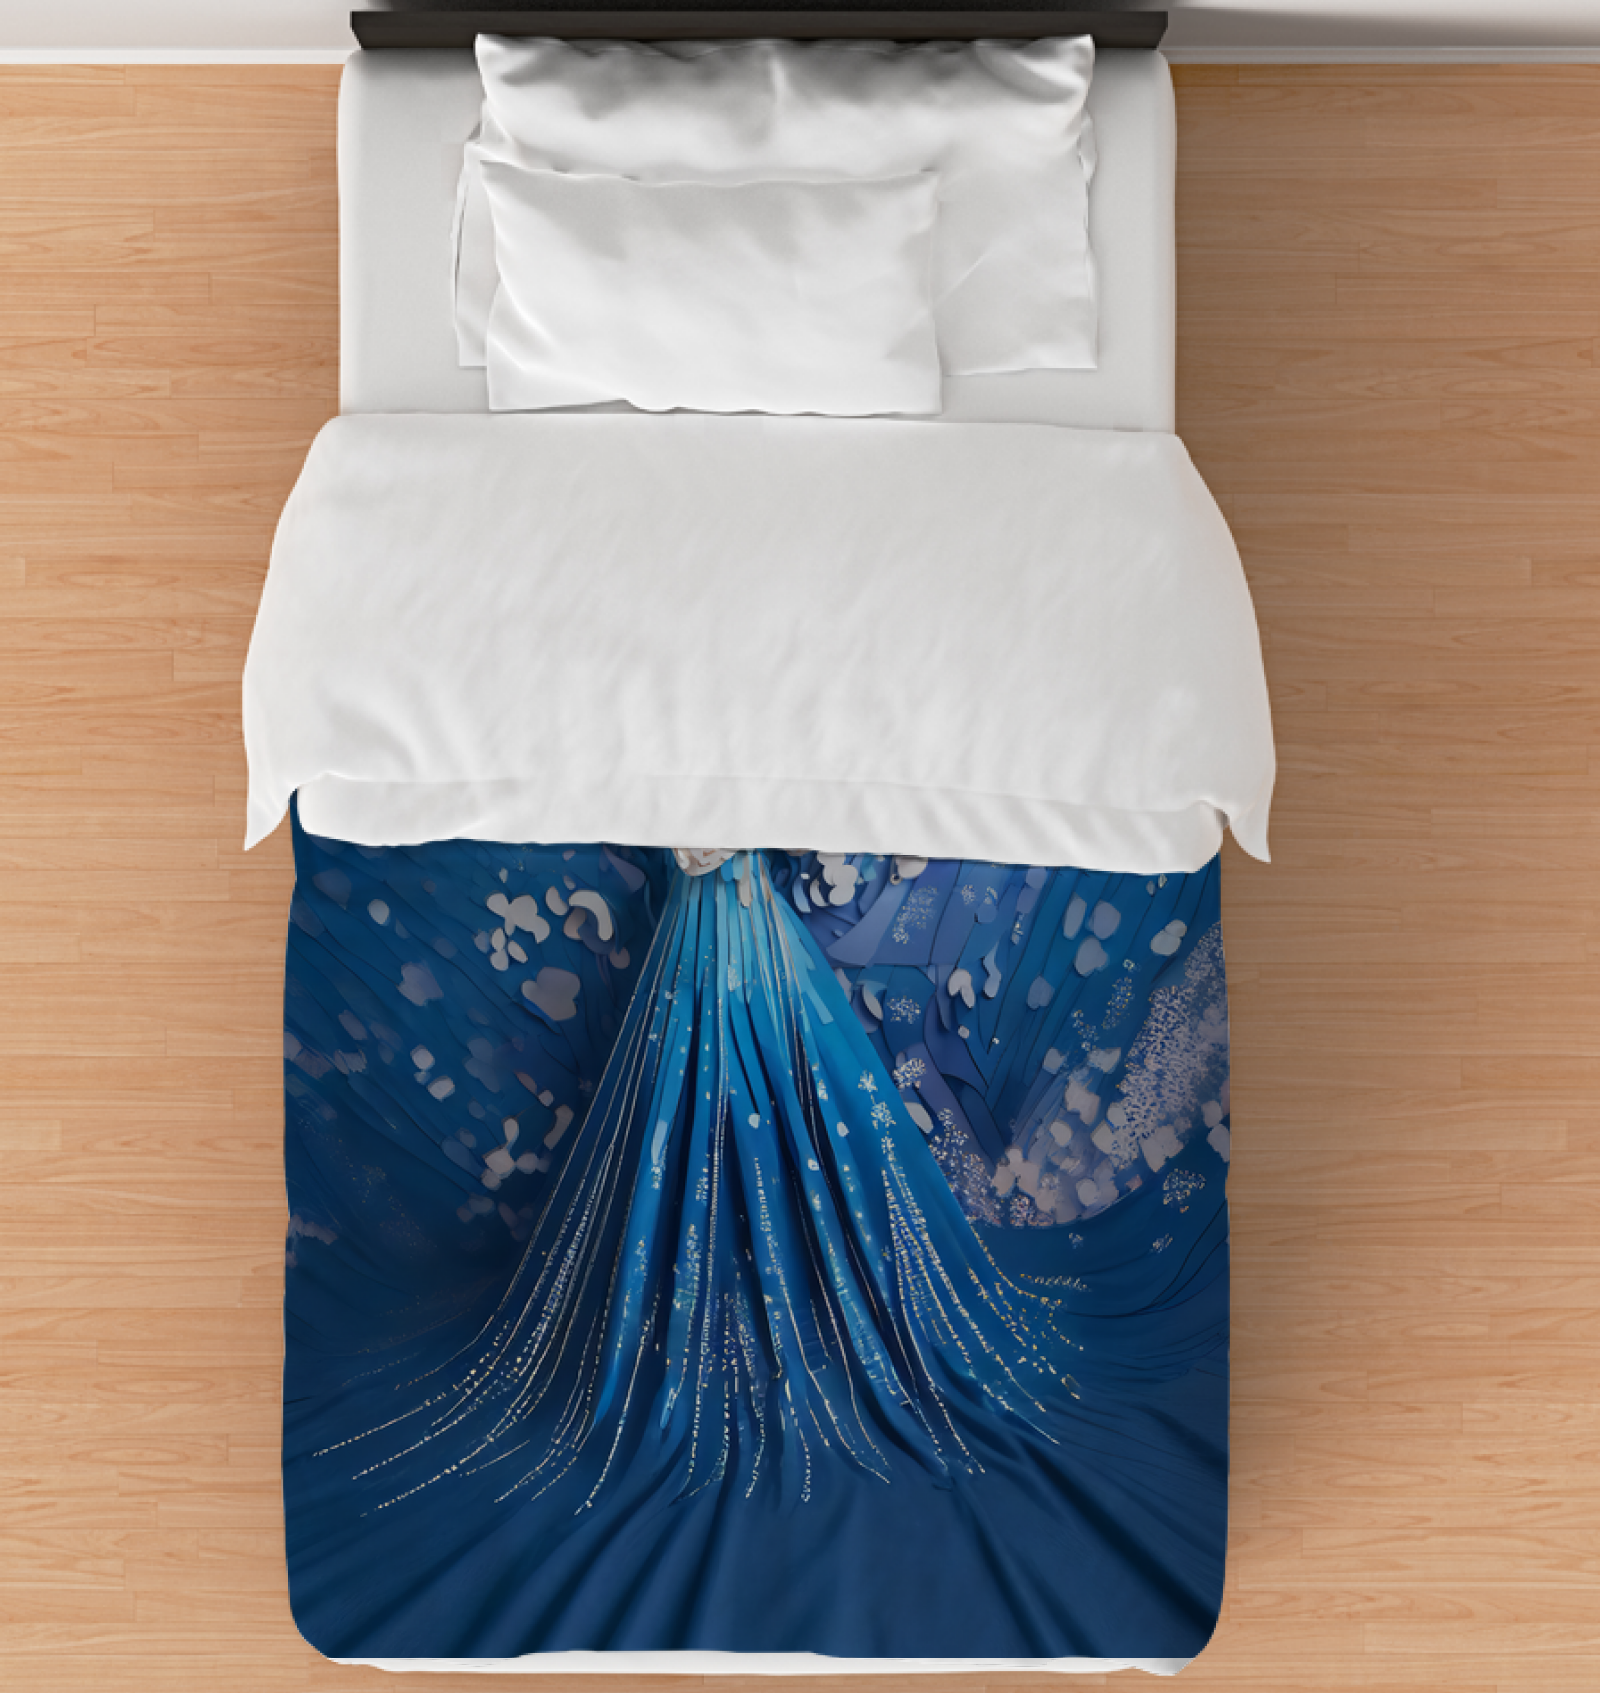 Duvet cover with delicate origami butterfly design.